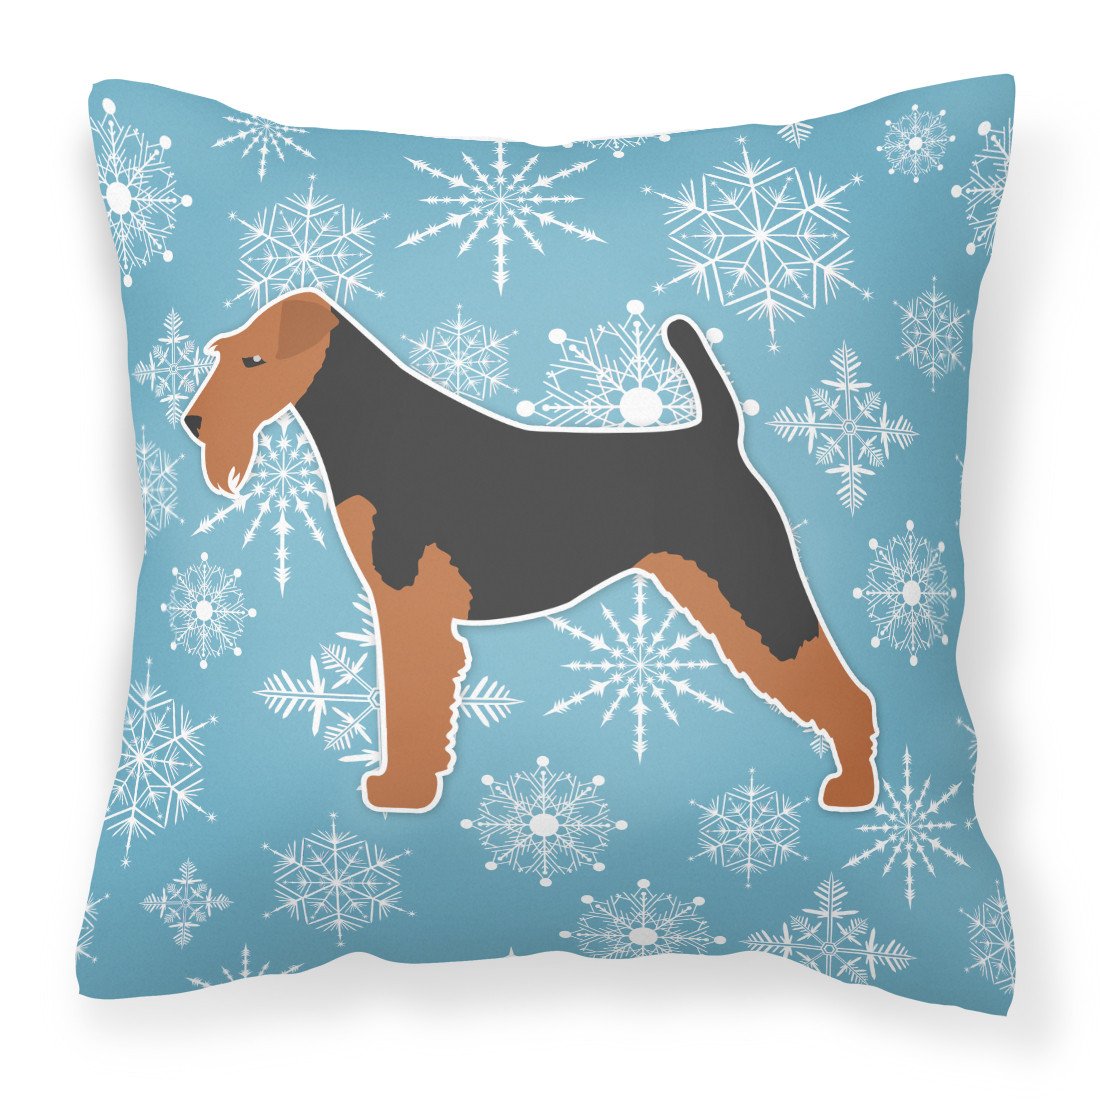 Winter Snowflake Welsh Terrier Fabric Decorative Pillow BB3485PW1818 by Caroline's Treasures